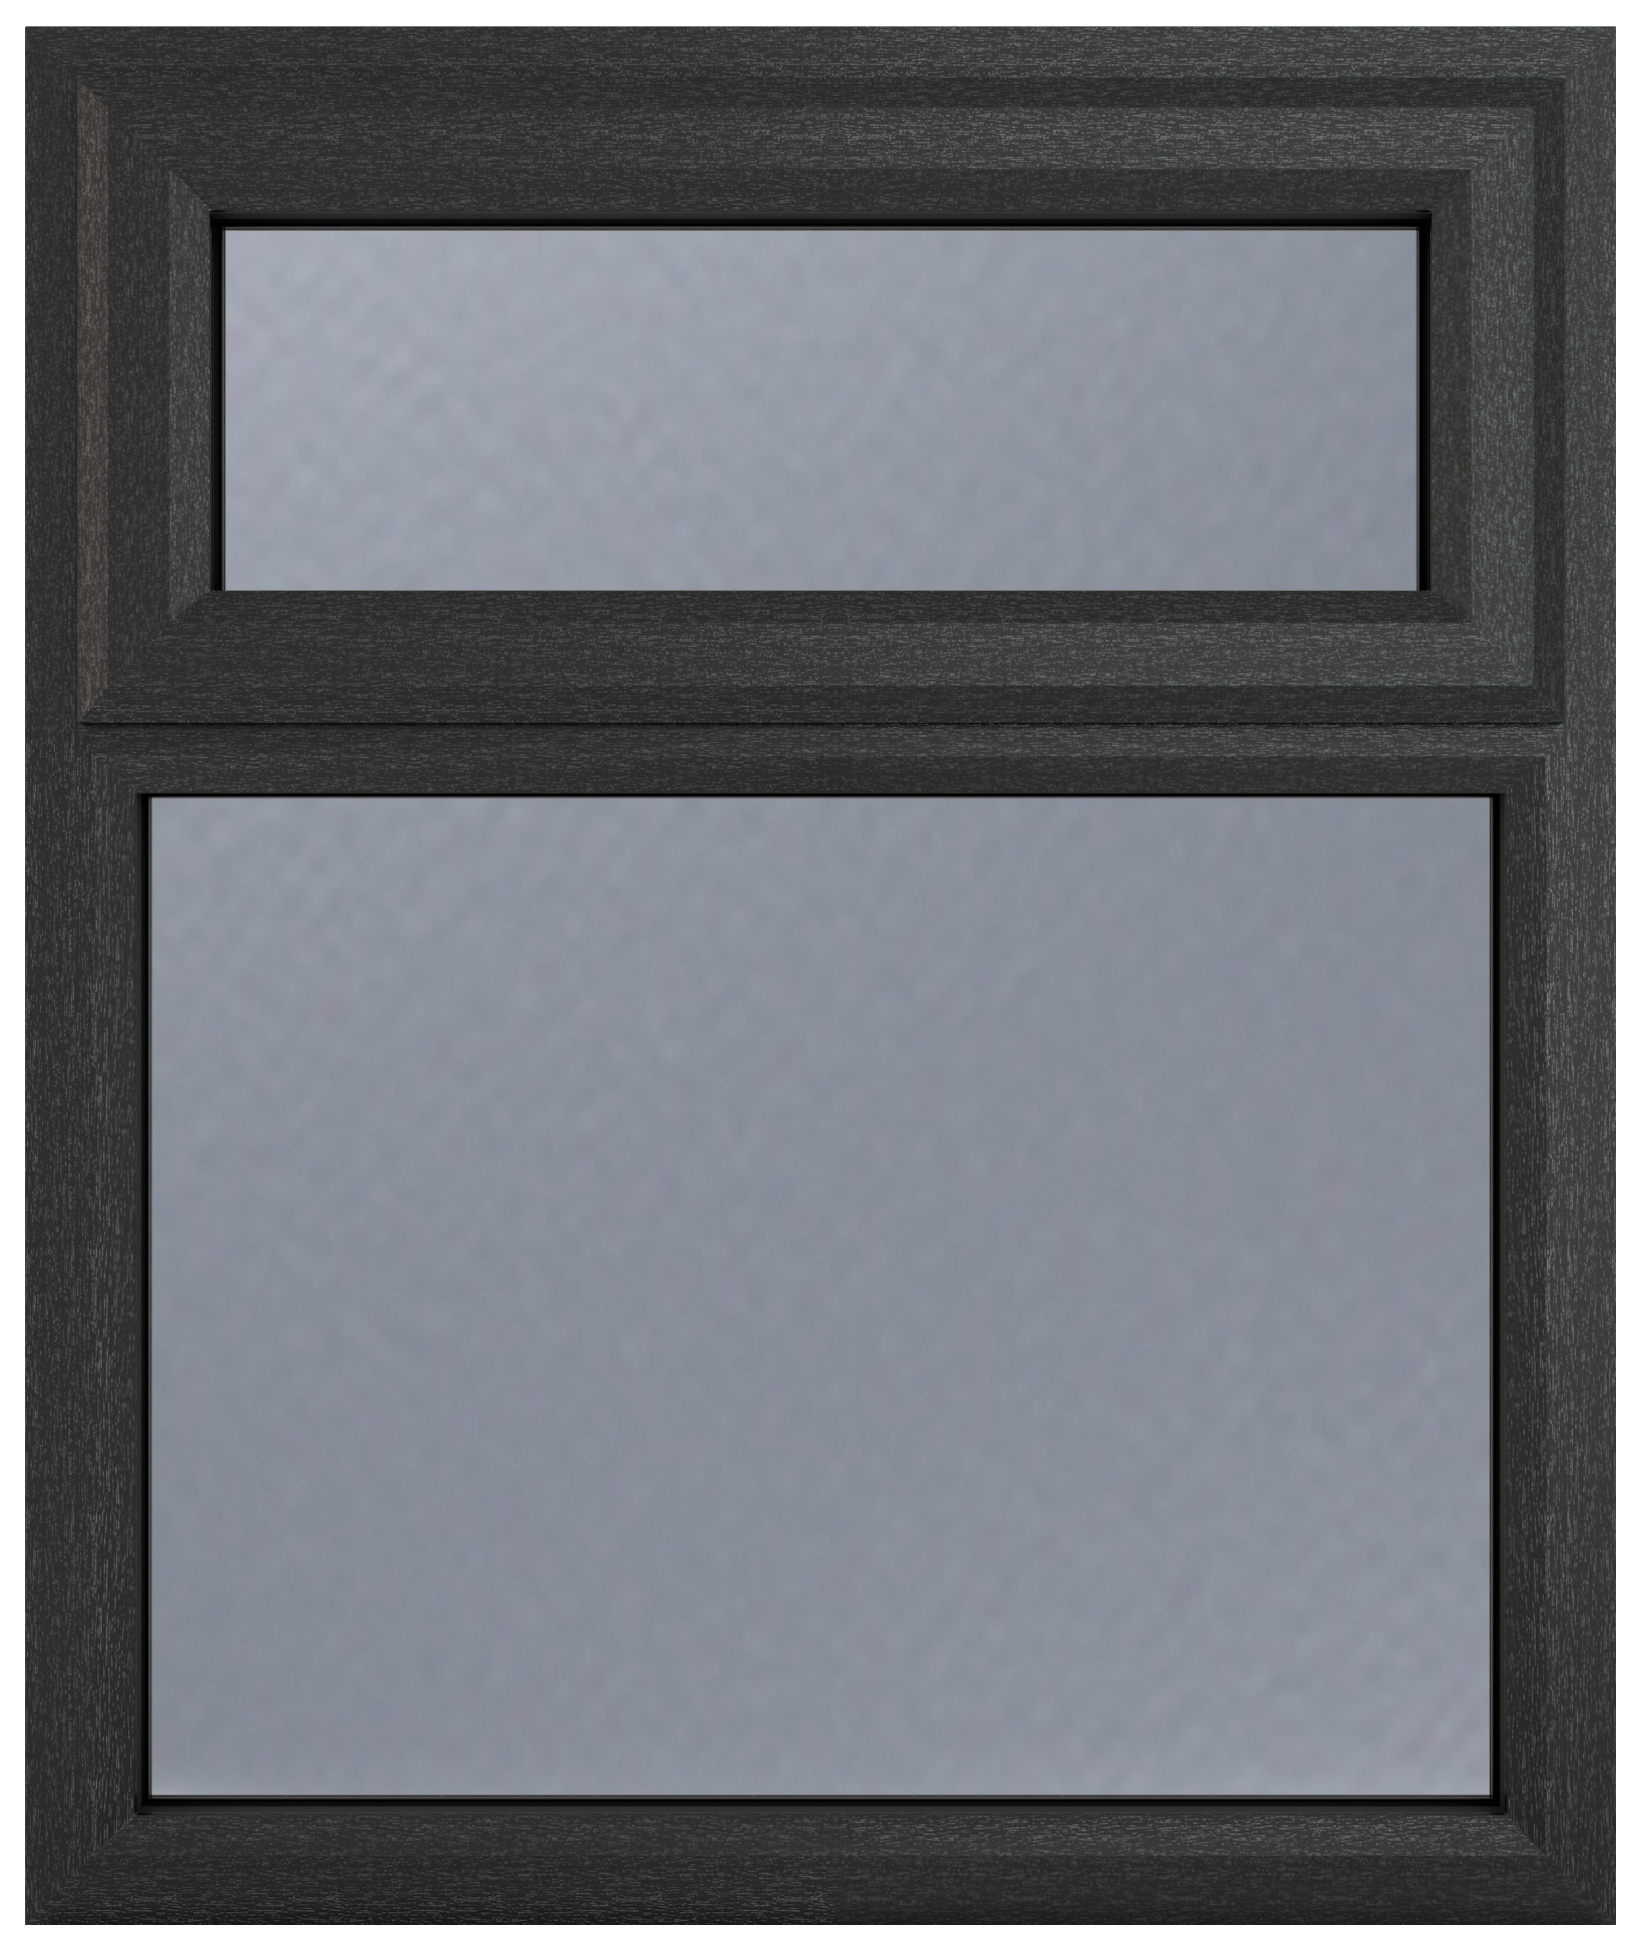 Crystal uPVC Grey Top Hung Opener Obscure Double Glazed Fixed Light Window - 1190 x 1115mm